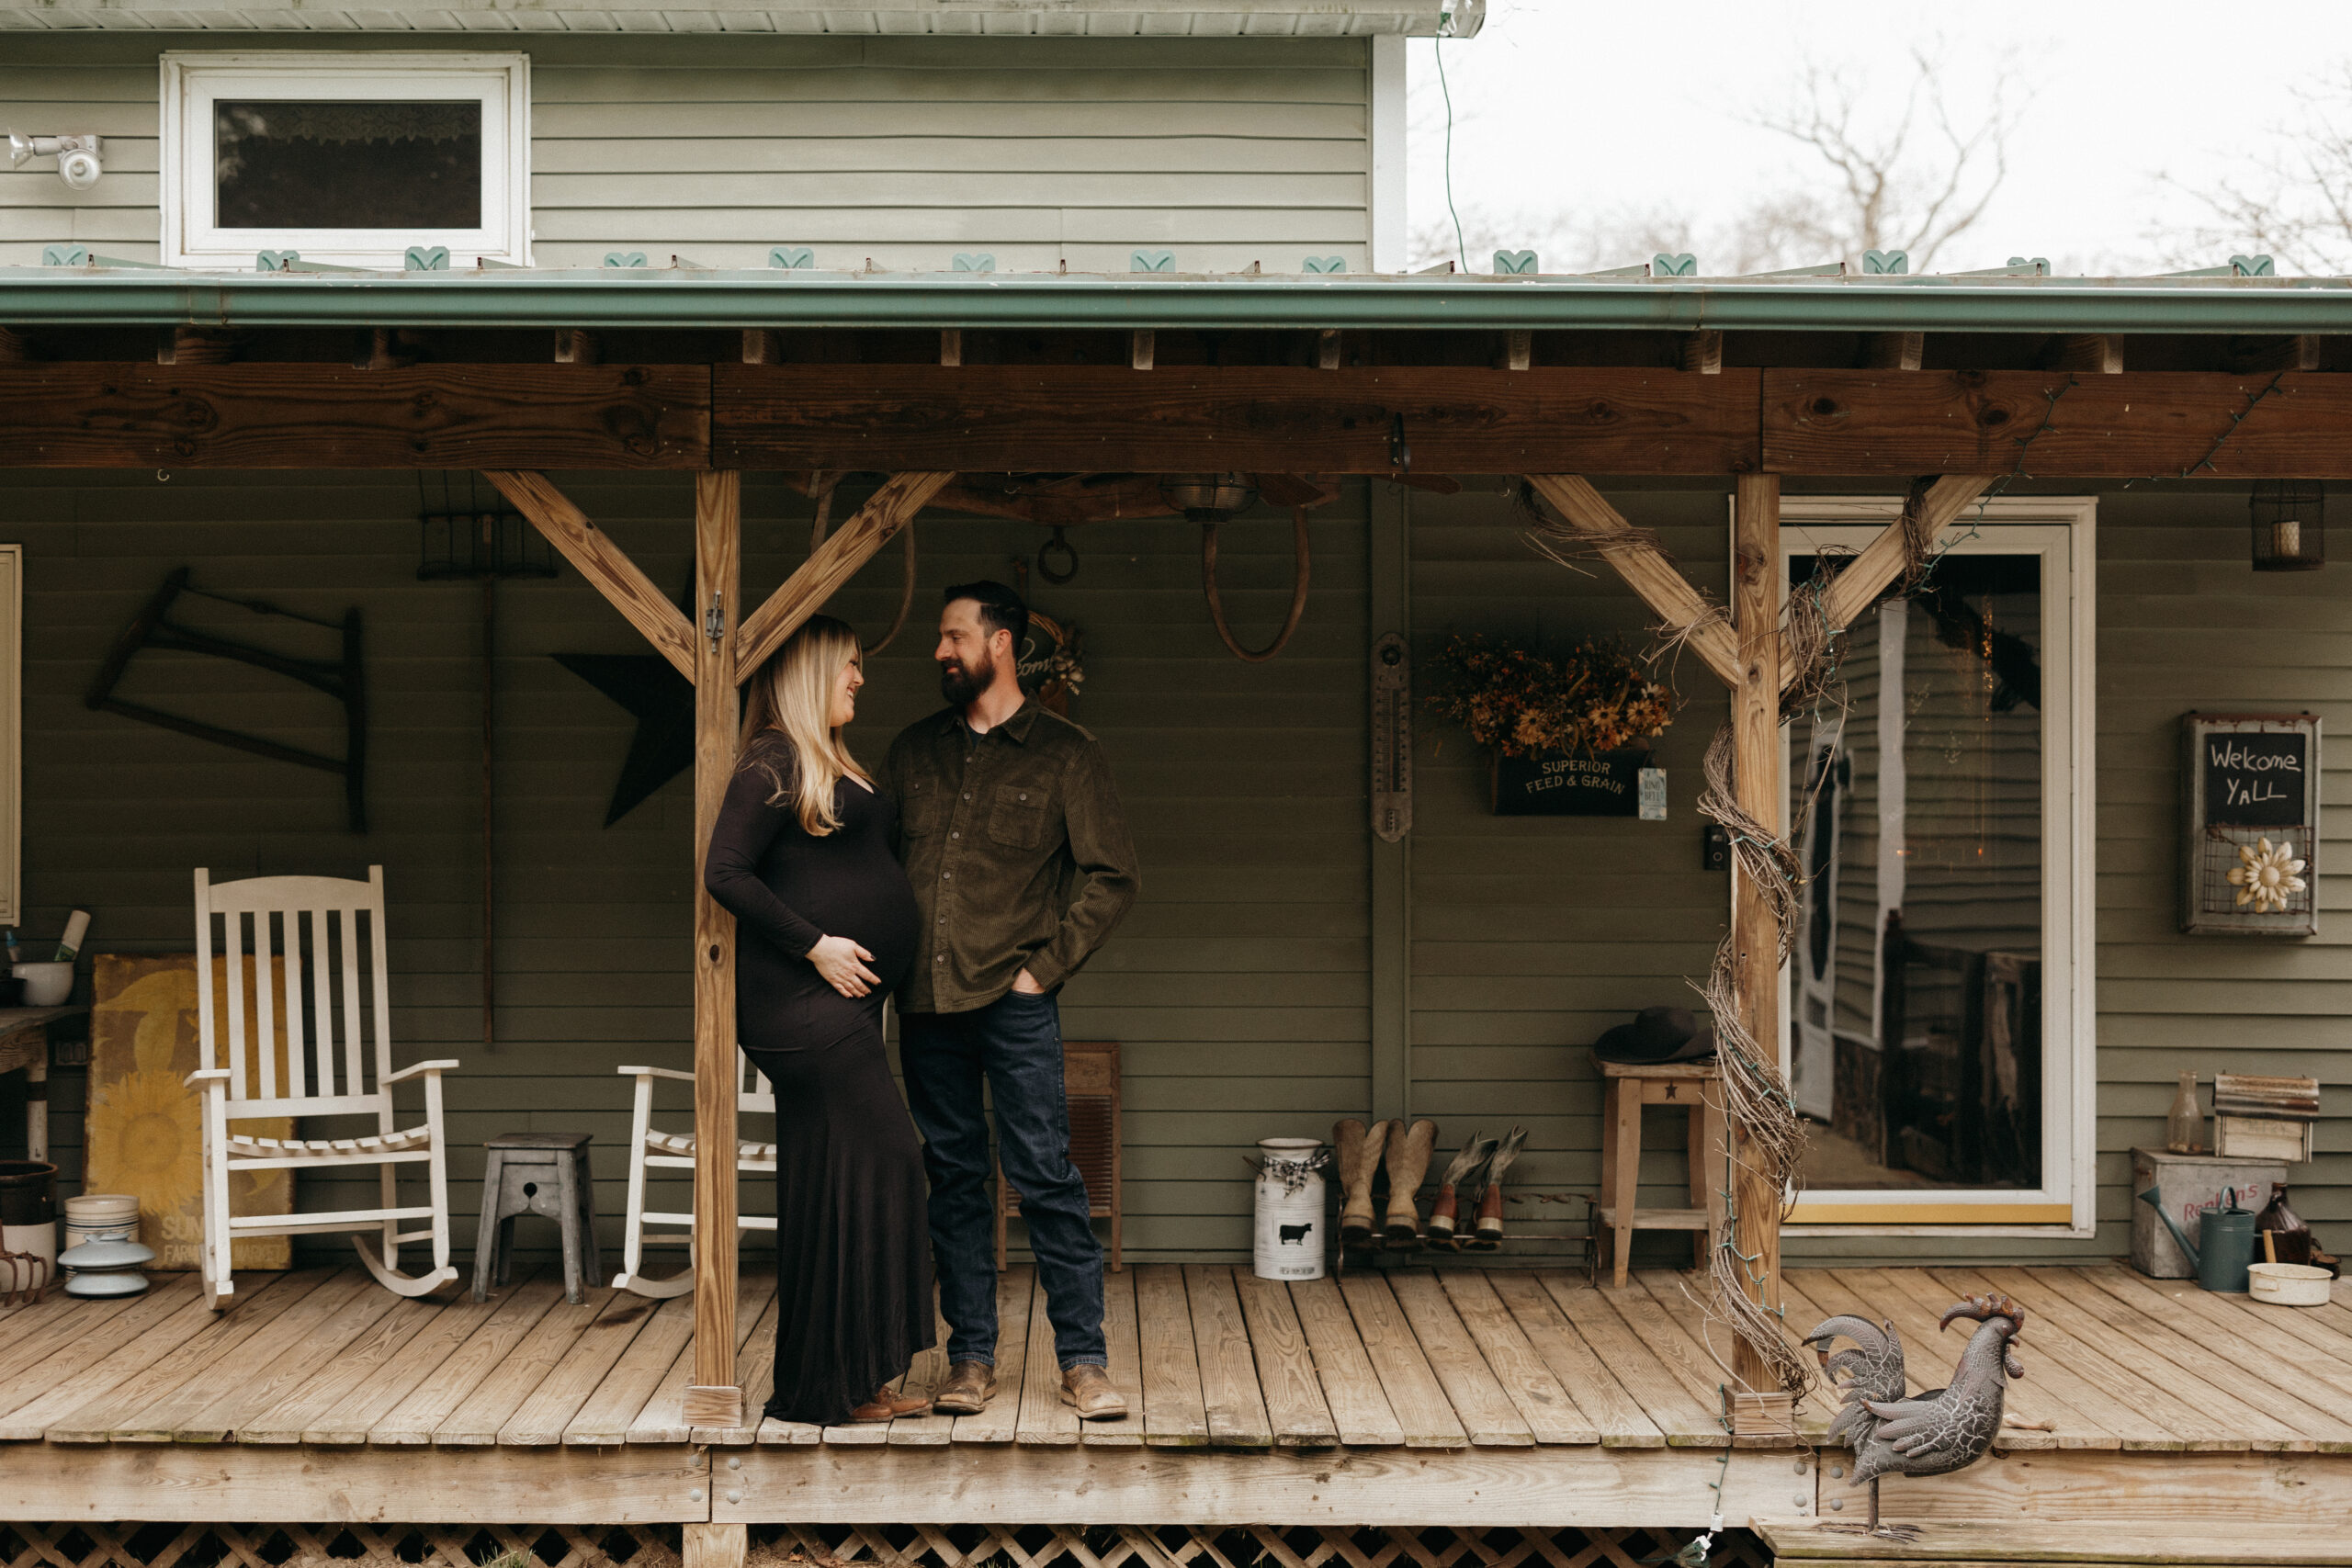 Maternity Session at a Farm house. The couple is standing on their porch. Mom is up against a post wearing a long black dress and dad is standing beside her looking down at her face.